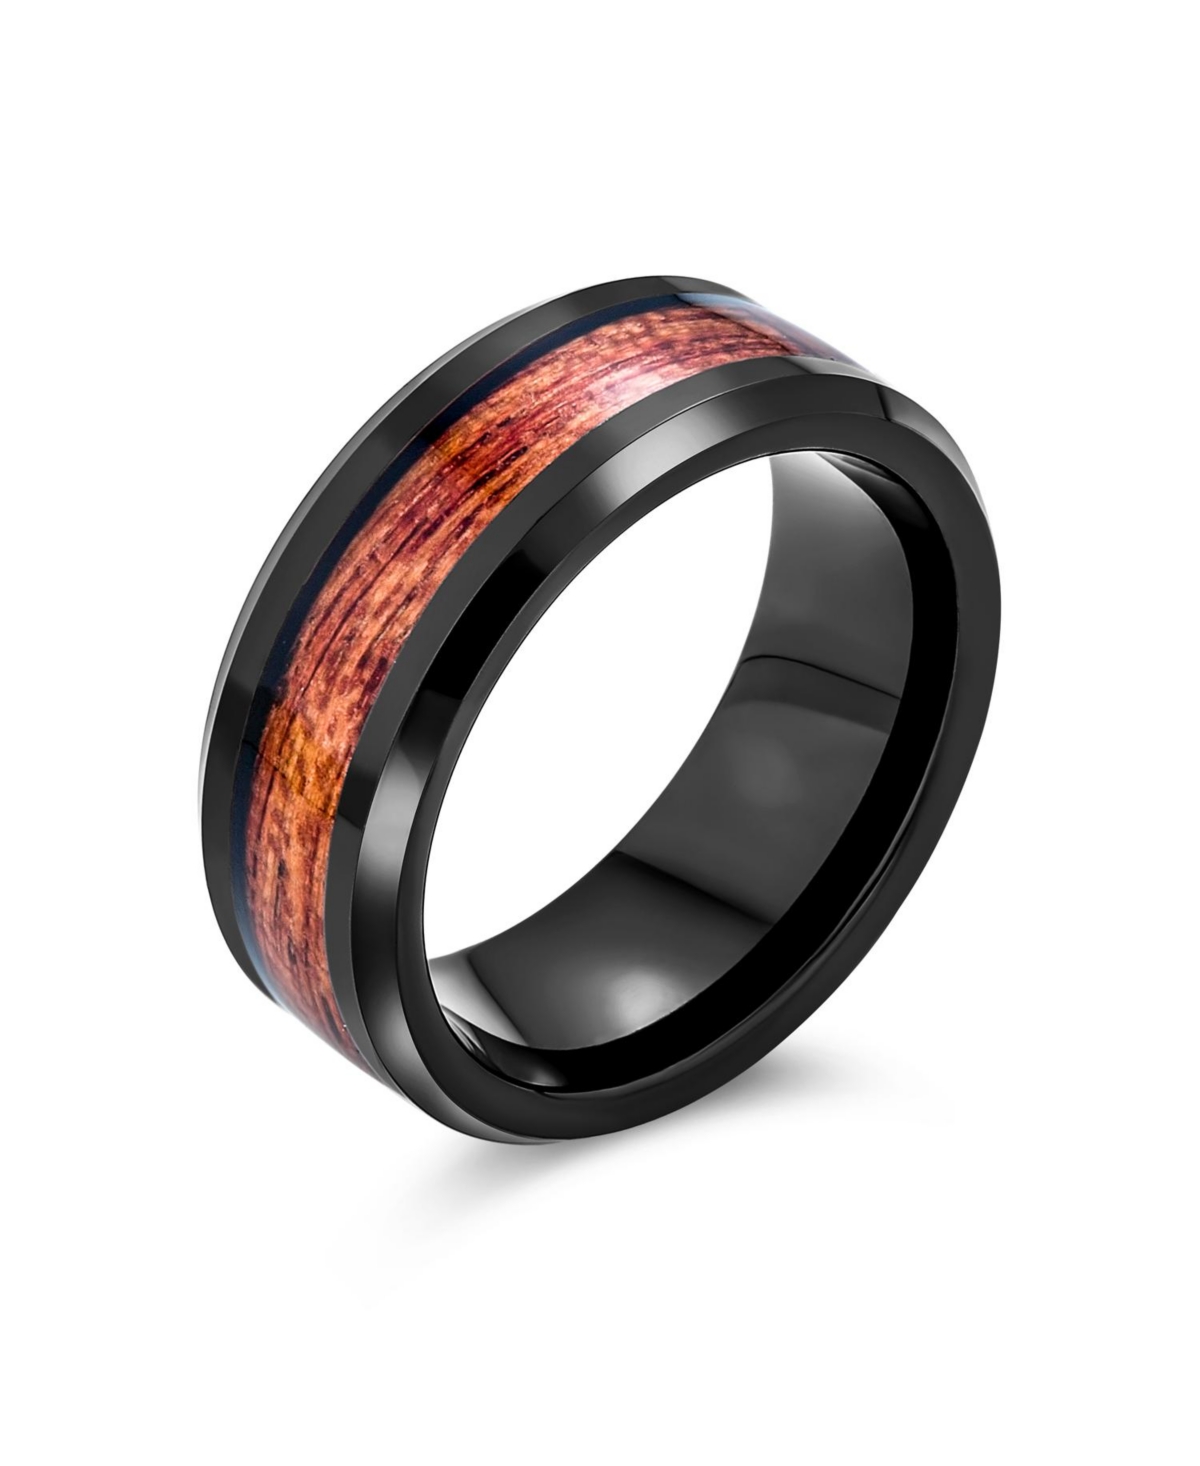 Koa Wood Style Inlay Titanium Wedding Band Rings For Men For Women Comfort Fit 8MM - Black